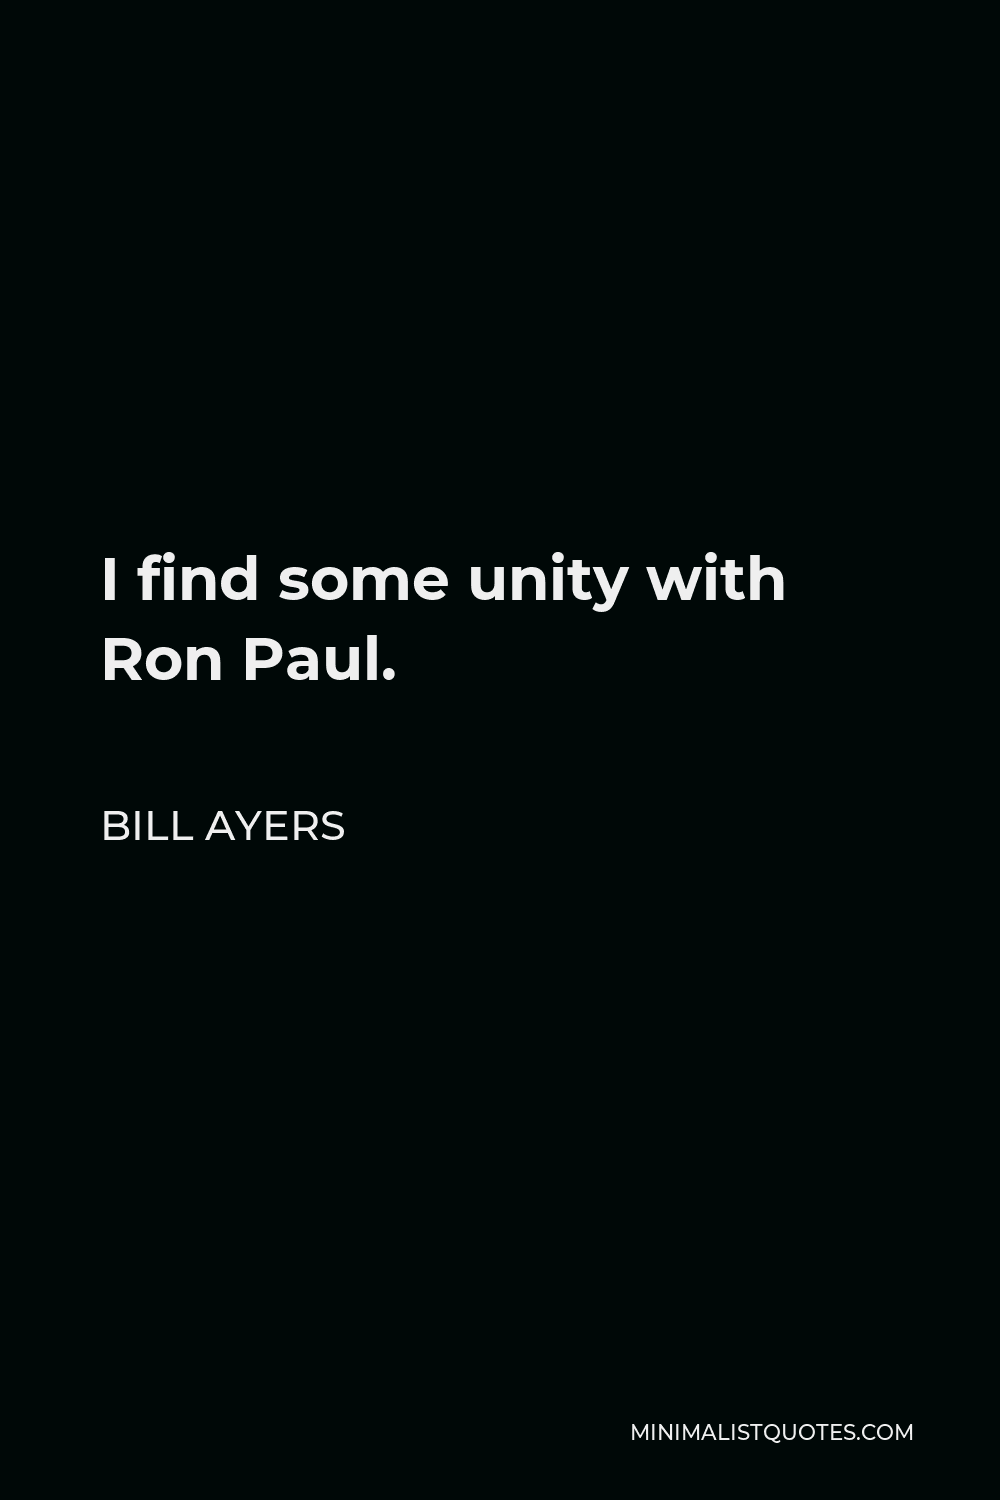 Bill Ayers Quote - I find some unity with Ron Paul.